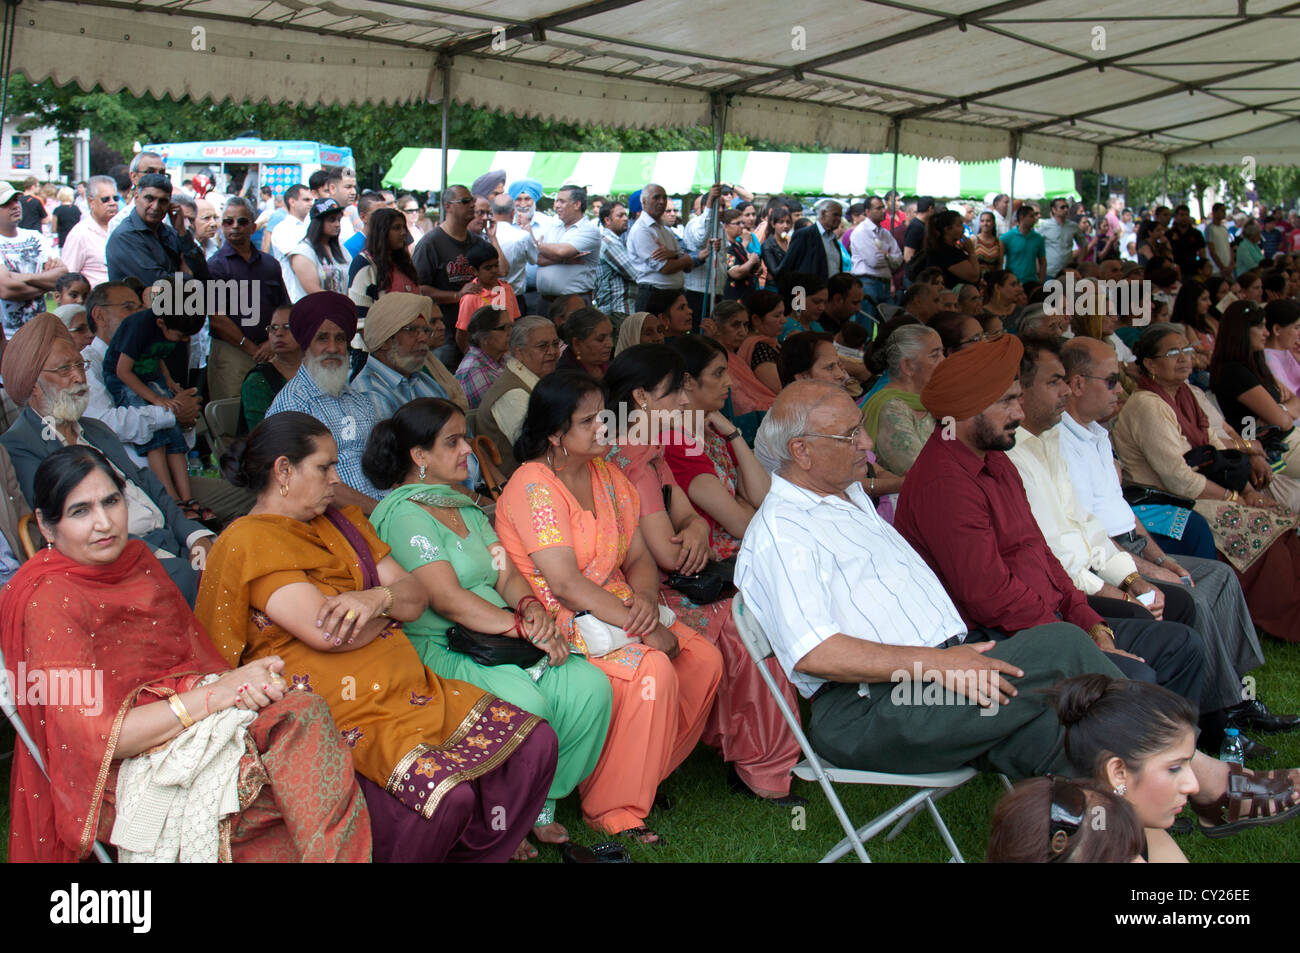 Audience at an Indian cultural festival, Leamington Spa, UK Stock Photo